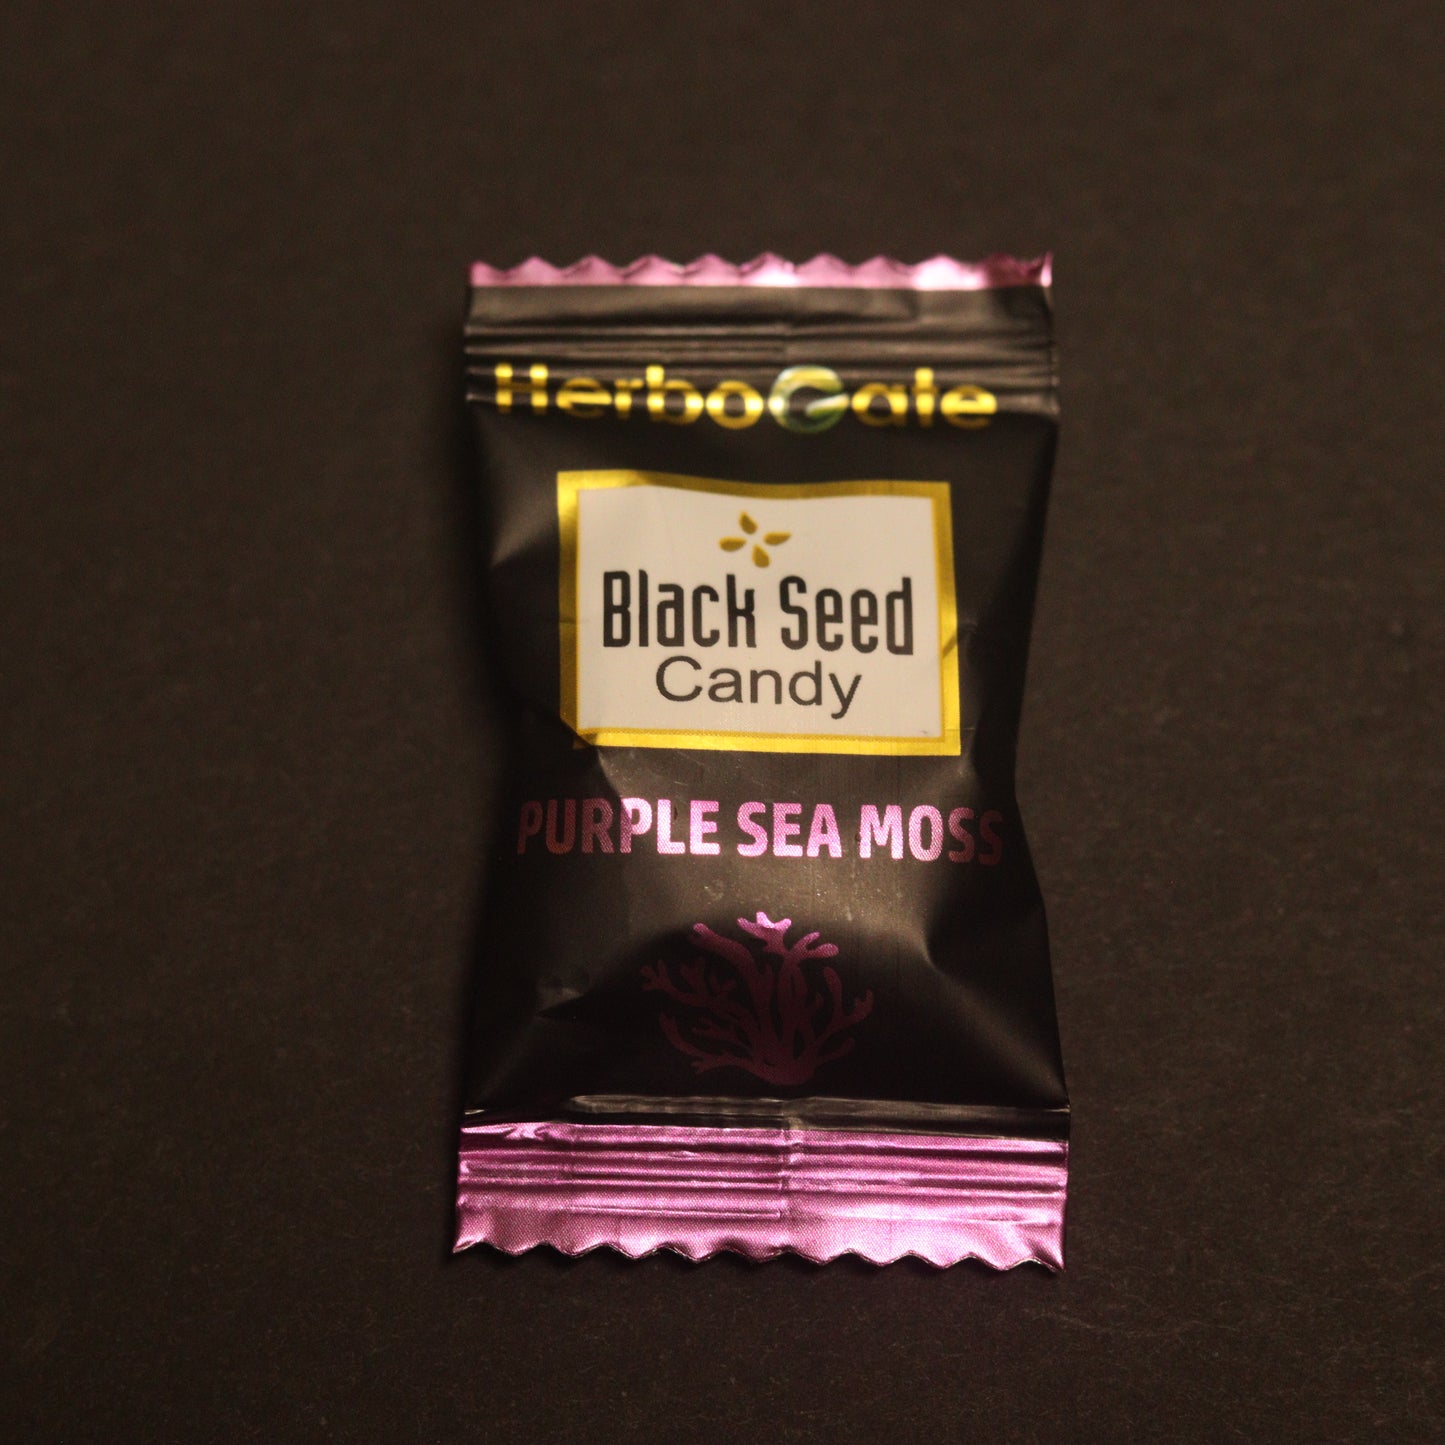 Black Seed Candy 4/$1